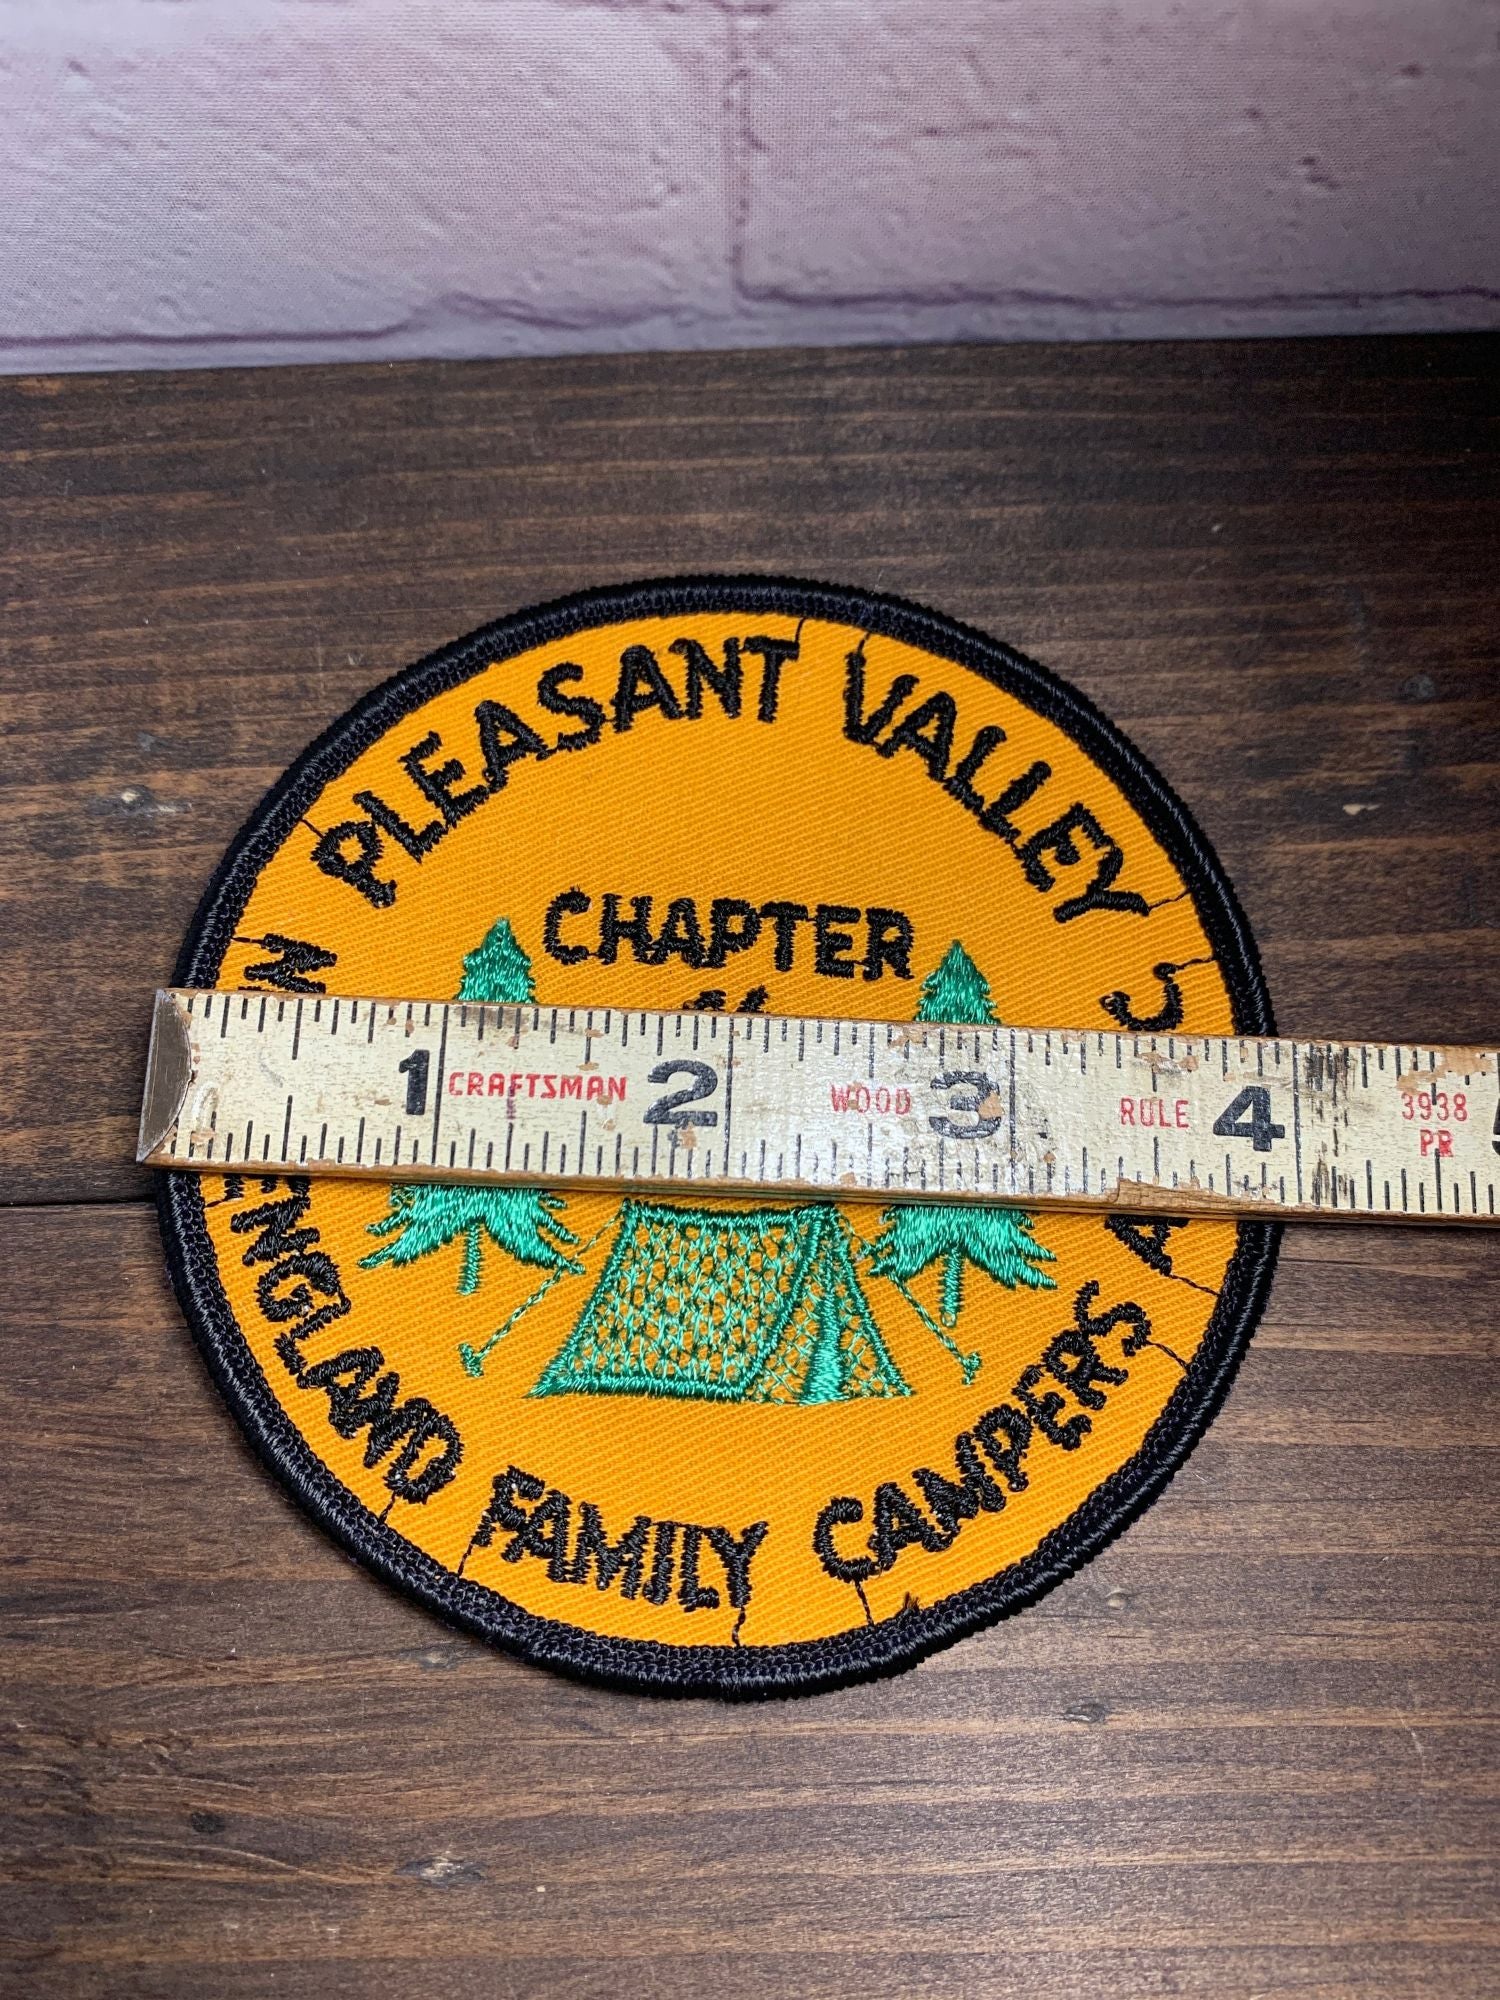 Vintage New England Family Campers Assoc, Pleasant Valley Patch - 4”Round